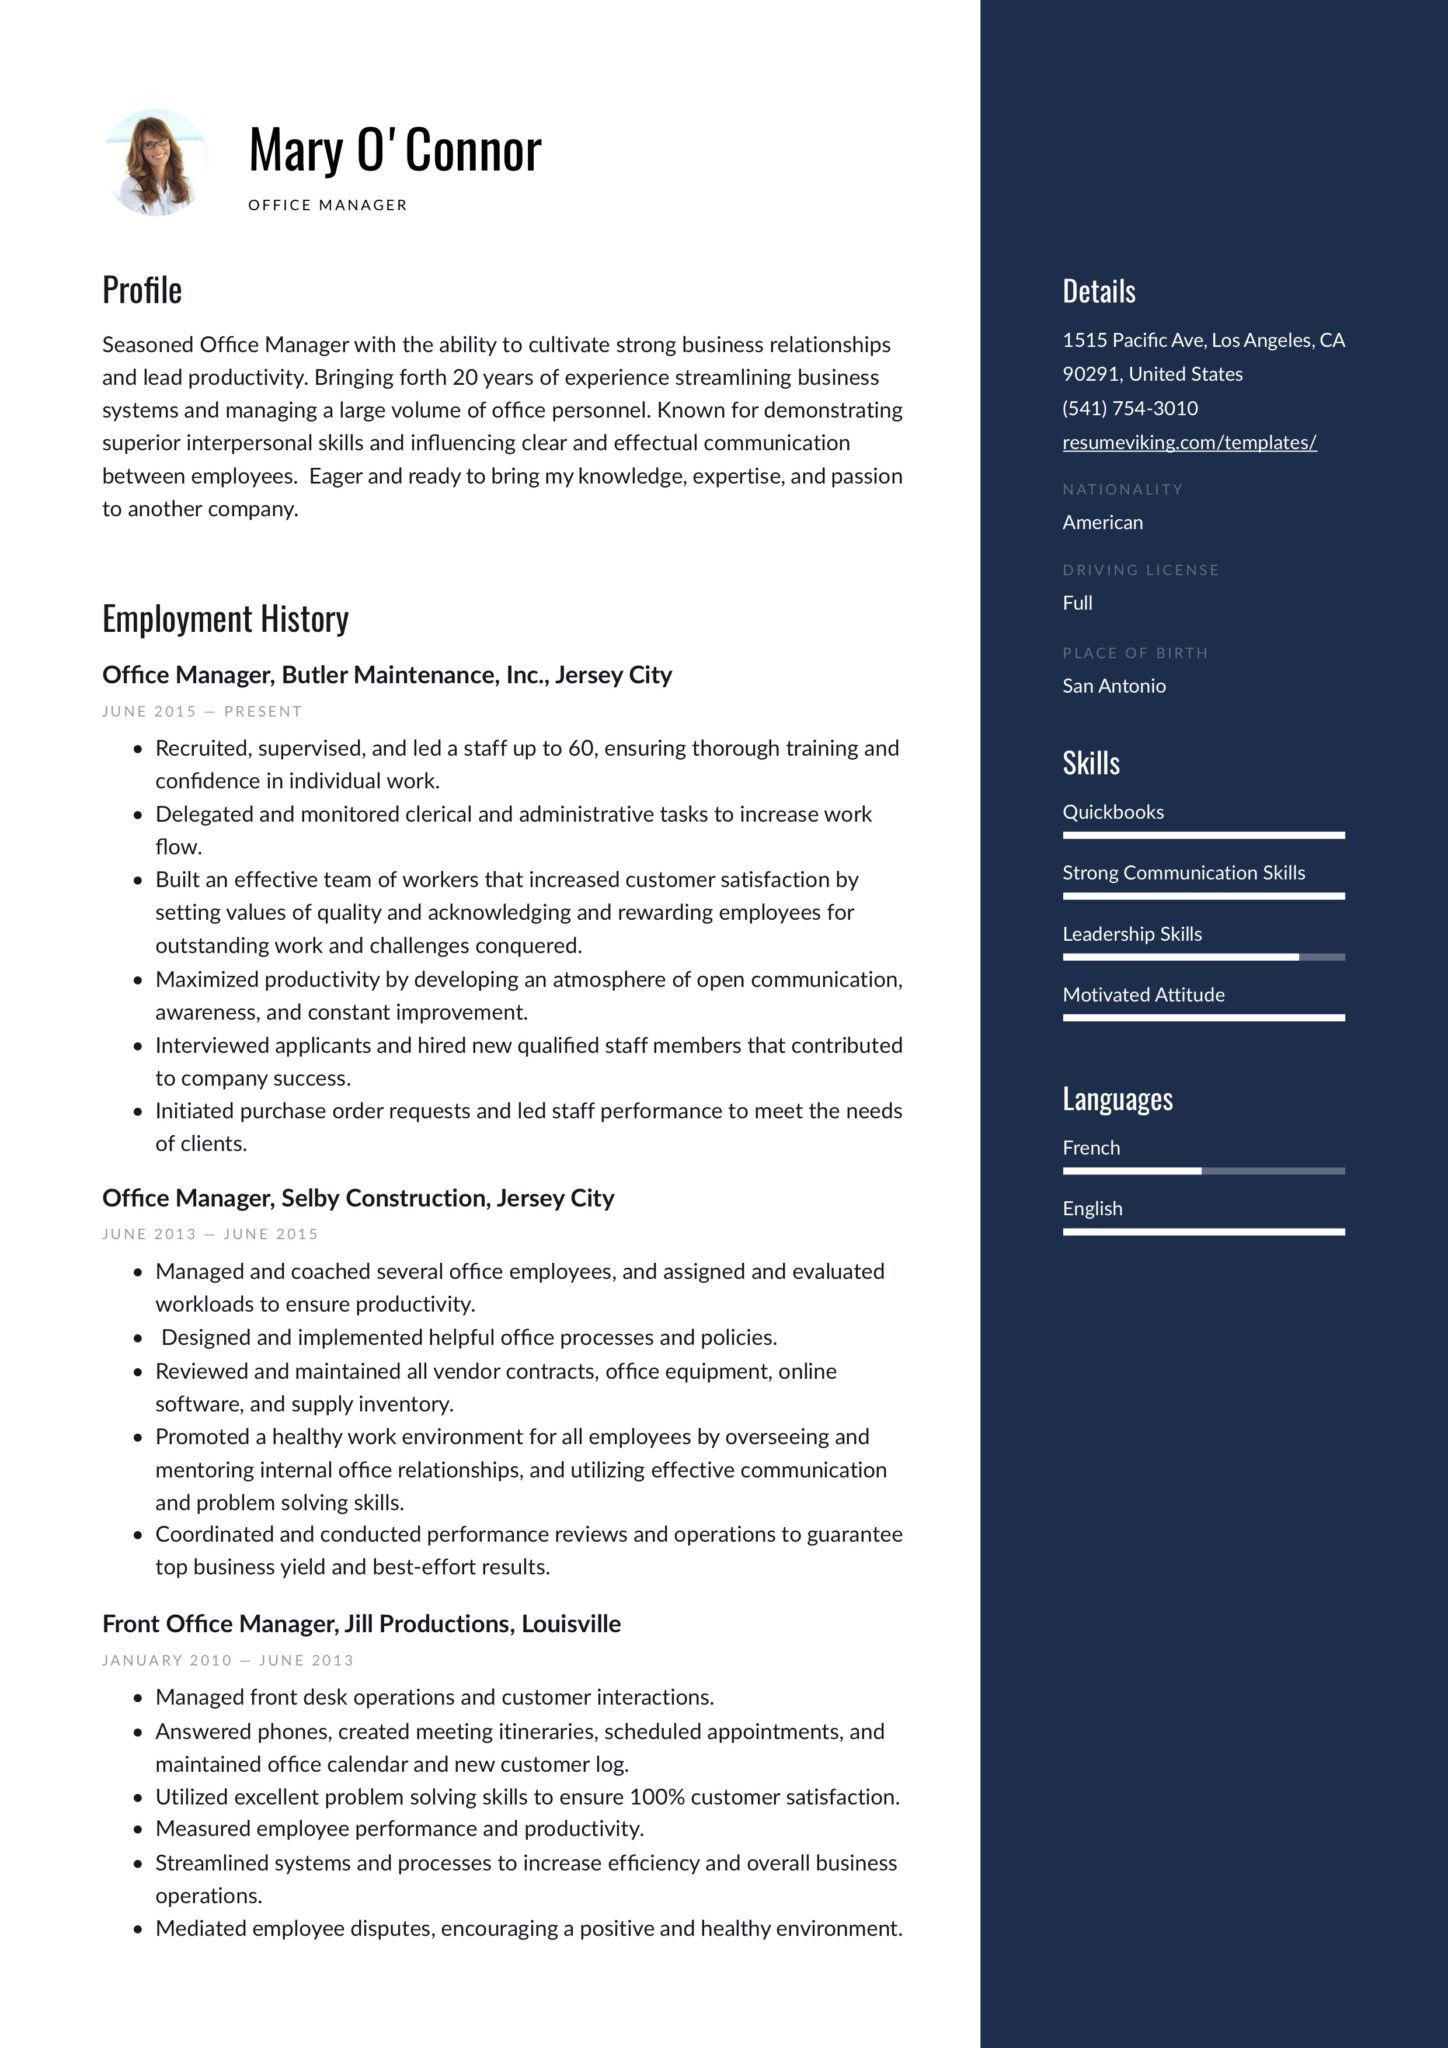 Front Of House Manager Resume Sample Office Manager Resume & Guide 12 Samples Pdf 2020